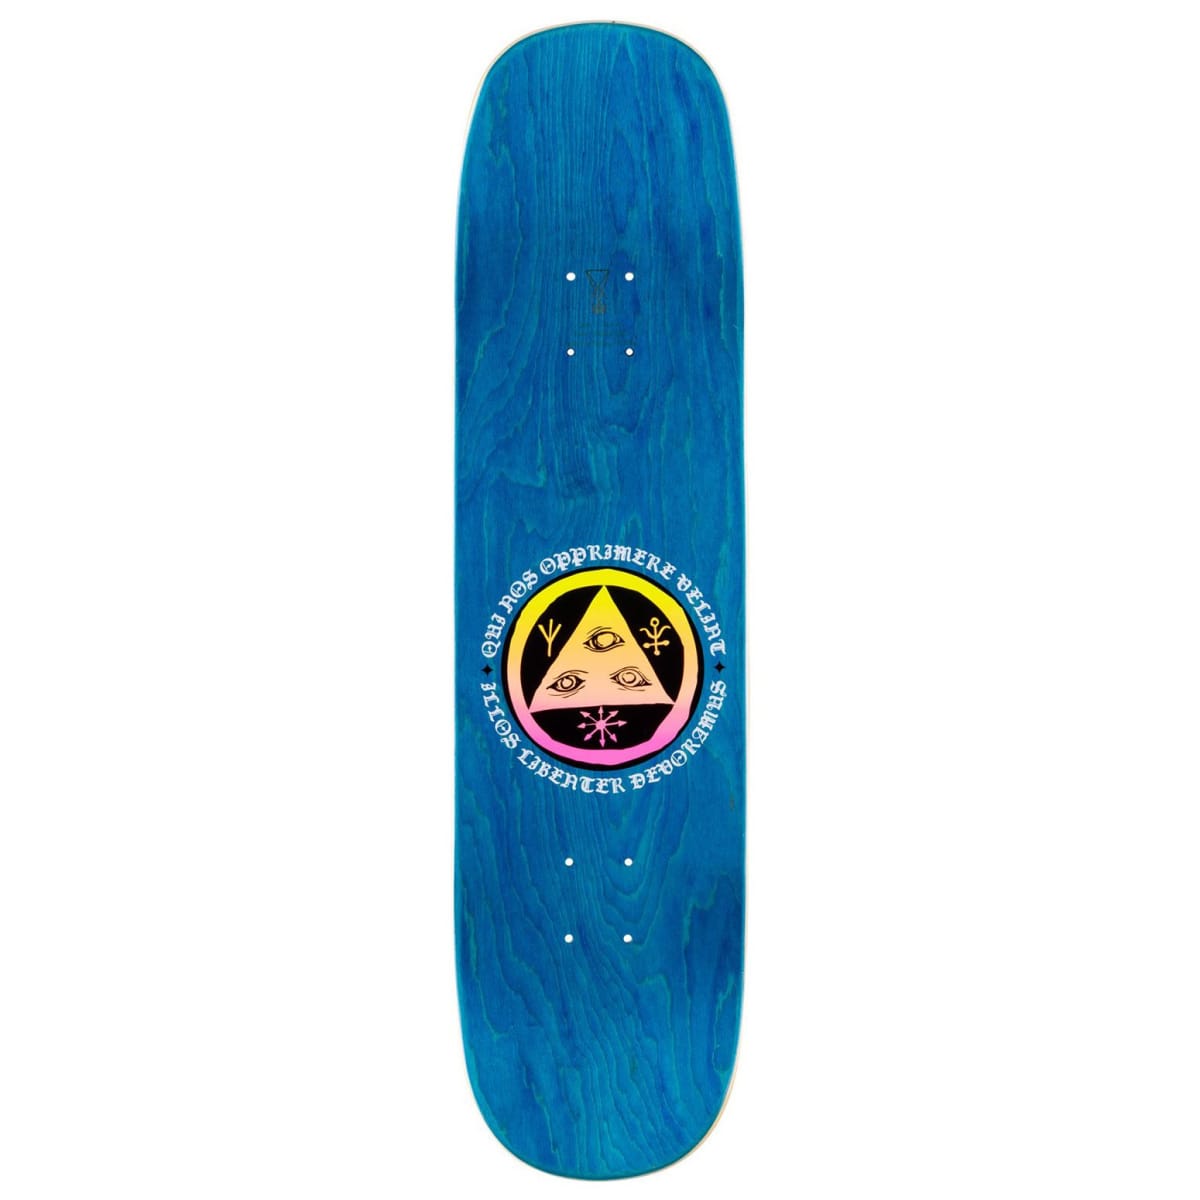 WELCOME DECK - SEAHORSE 2 ON AMULET (8.25") - The Drive Skateshop